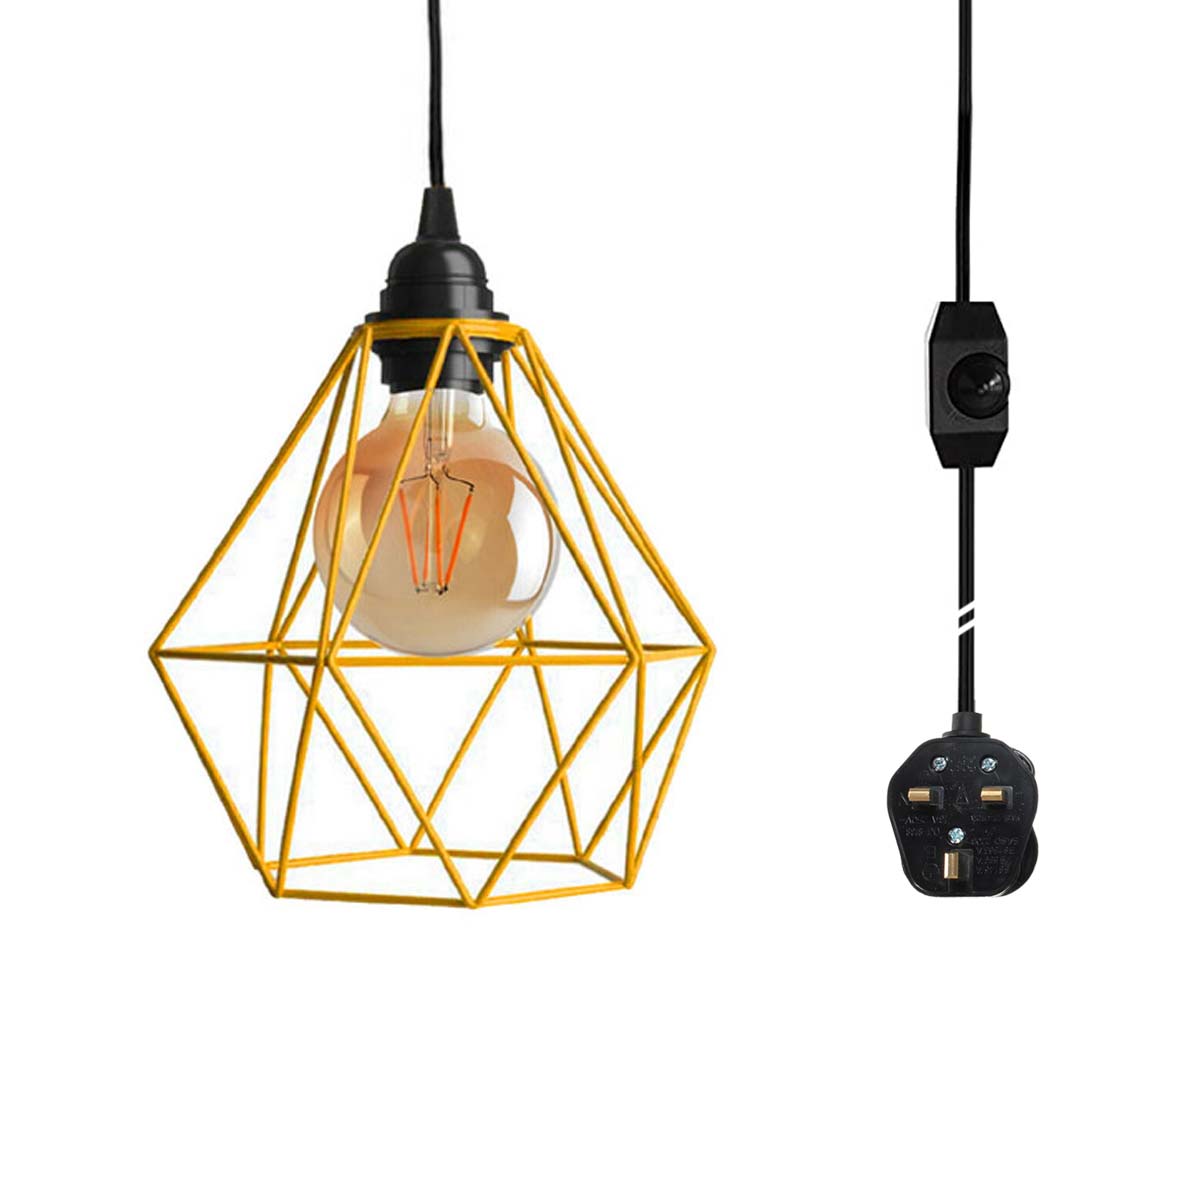 Plug In Pendant With Dimmer Switch 4m Fabric Cable Diamond Cage Light